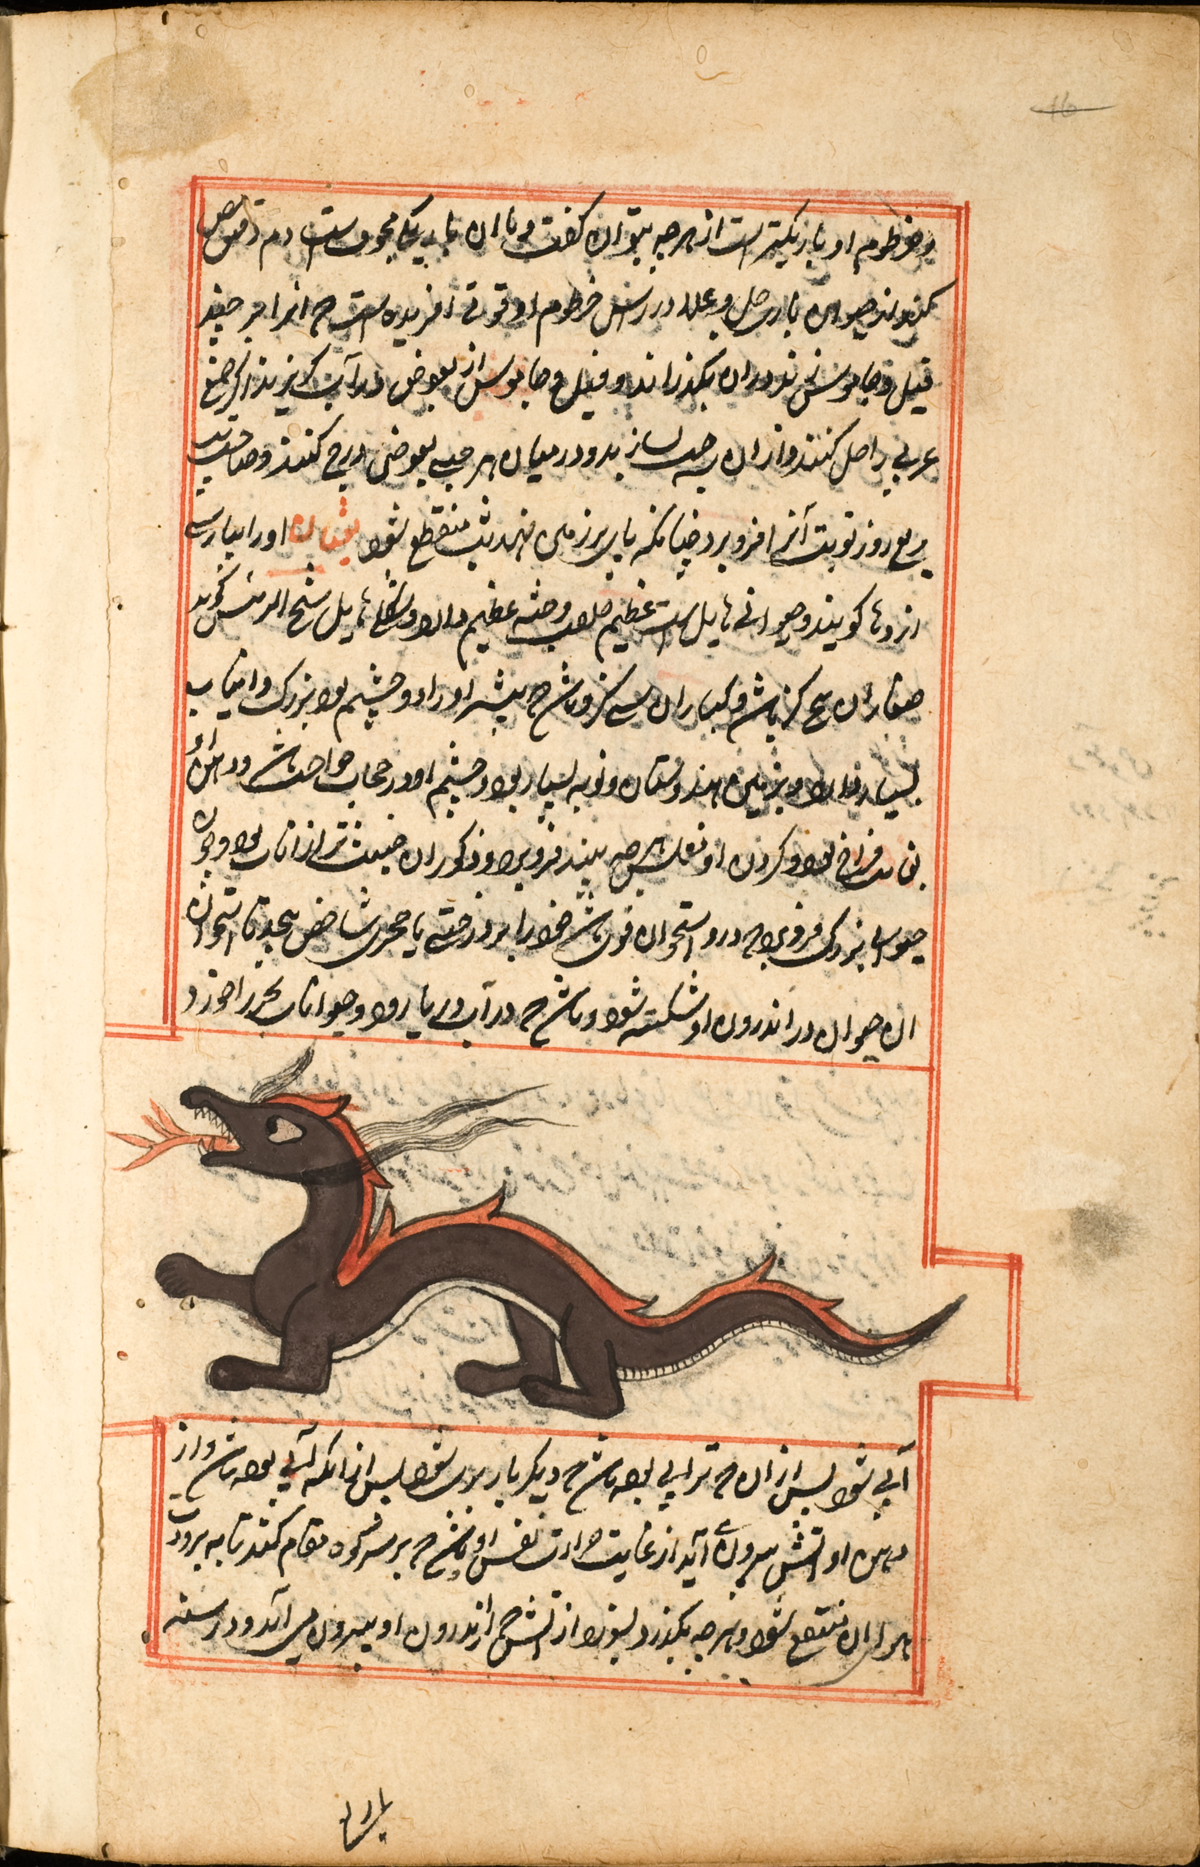 A brown fire-breathing dragon with a red crest extending from the top of its head half way down its tail, with a long, lizard-like body, surrounded by Persian text and a red double ruled border.